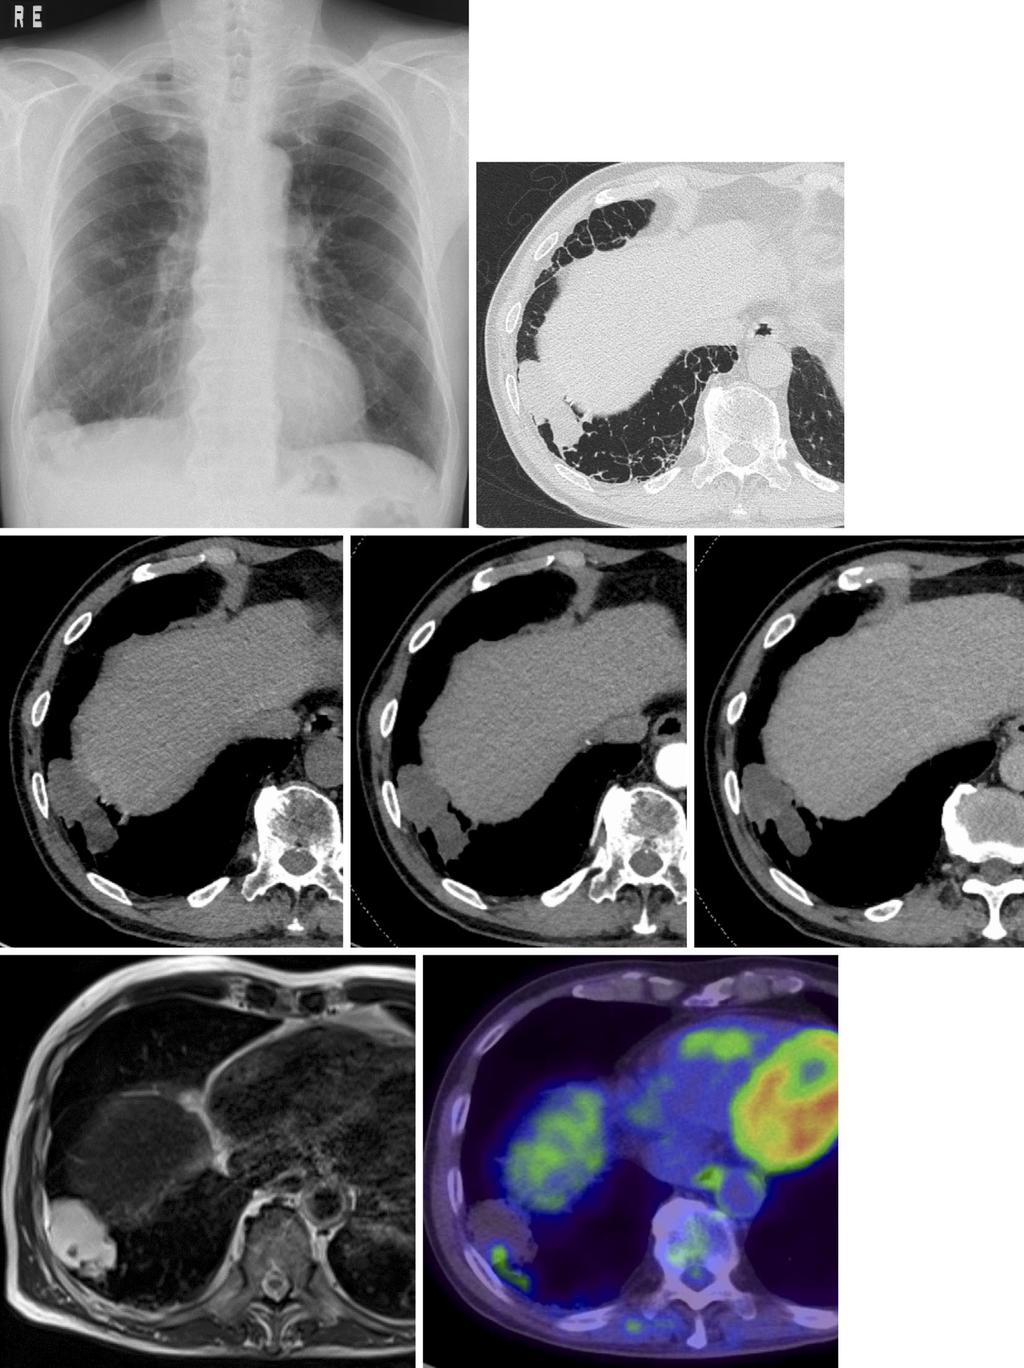 (a) (b) (c) (d) (e) (f) (g) Figure 1. Radiologic findings in a 76-year-old man with primary pulmonary colloid adenocarcinoma. (a) Chest radiograph shows a mass in the right lower lung field.